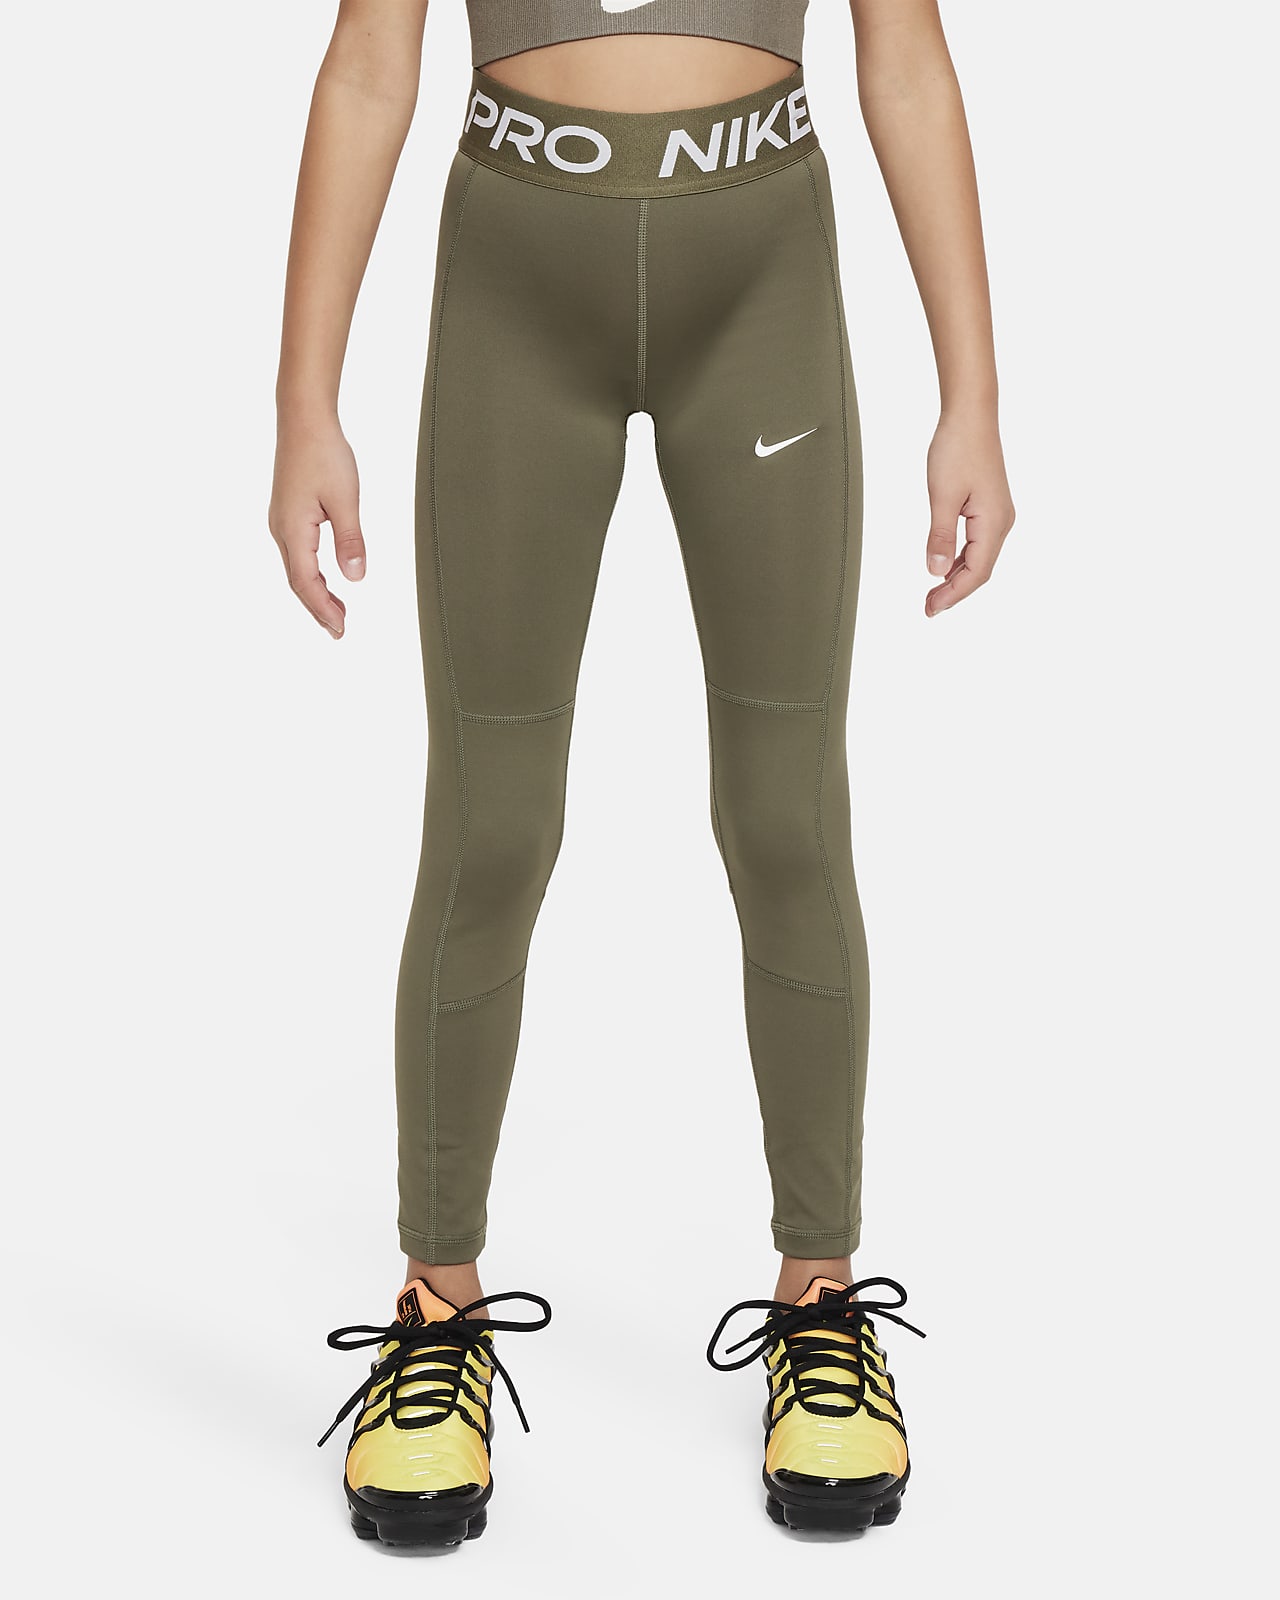 https://static.nike.com/a/images/t_PDP_1280_v1/f_auto,q_auto:eco/9d3421fa-07e1-429e-b8da-1a0bd2ead719/leggings-dri-fit-pro-leak-protection-period-bambina-xq7V17.png